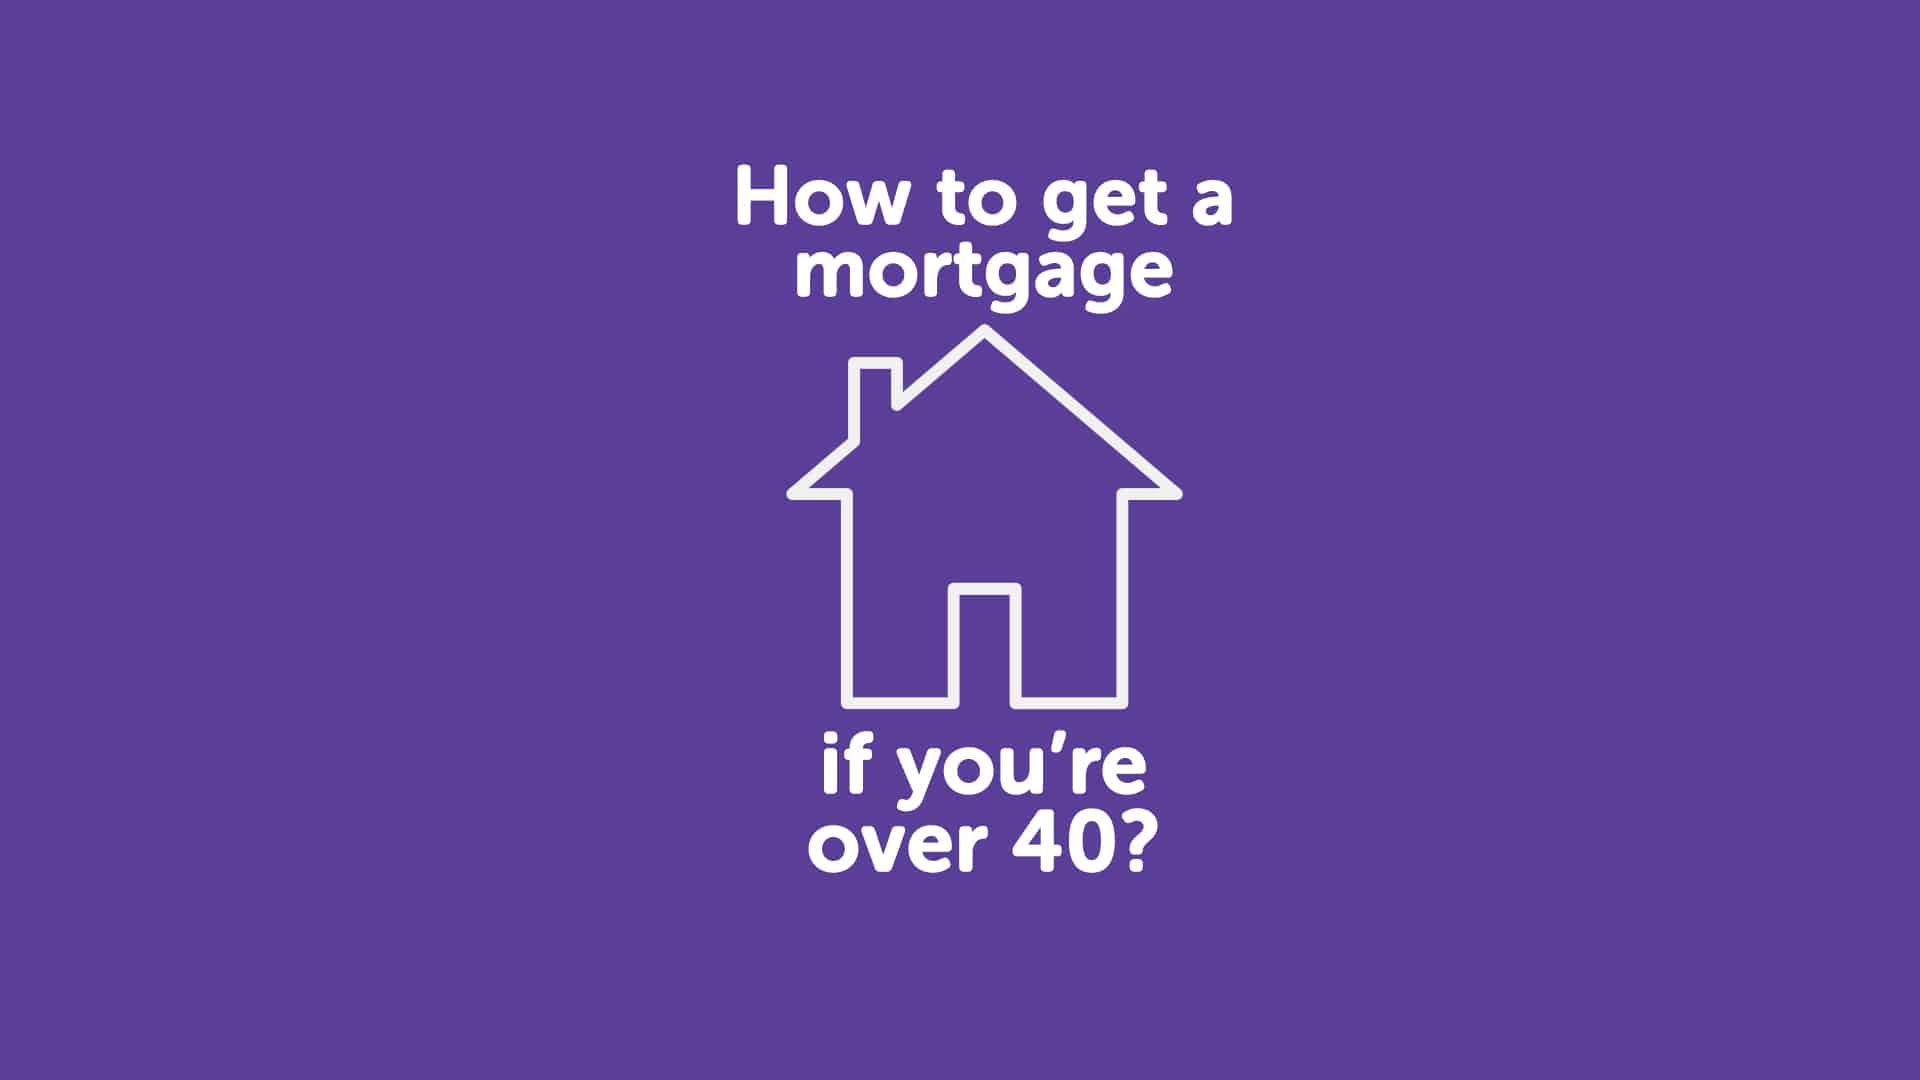 How to Get a Mortgage in York if You're Over 40